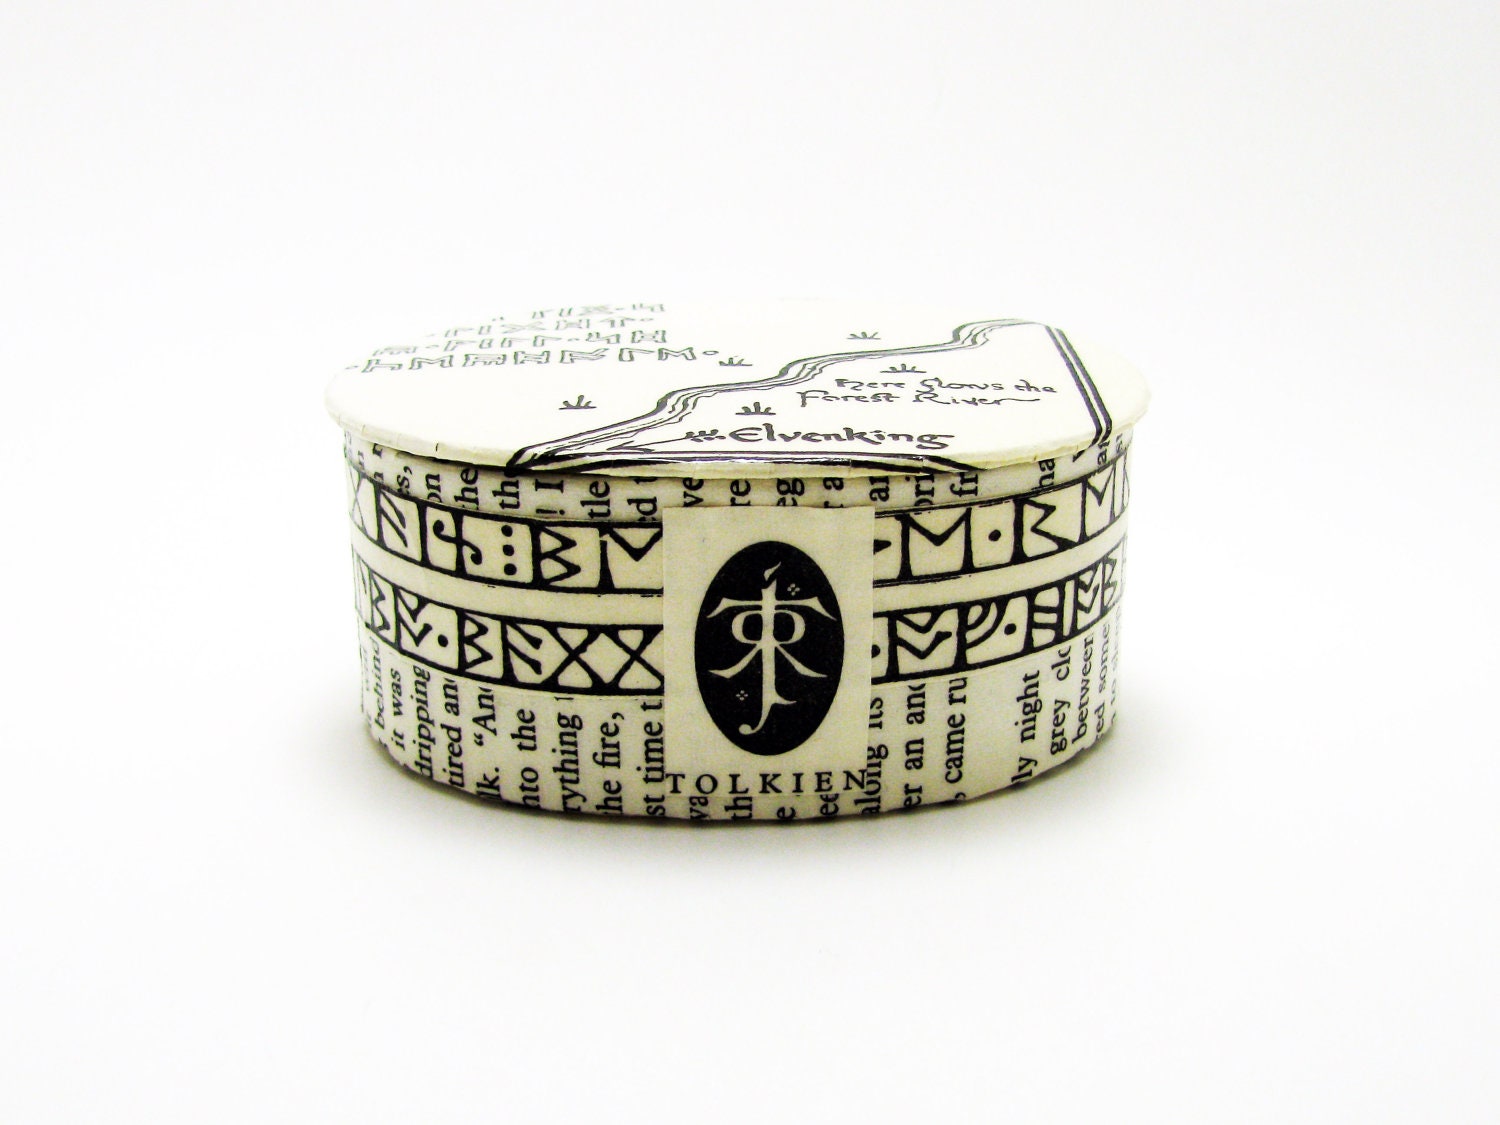 The Hobbit JRR Tolkien Map Decorative Box - Small Box - Trinket Box - Oval Shaped - Decoupaged, Lacquered - EarthAndInk